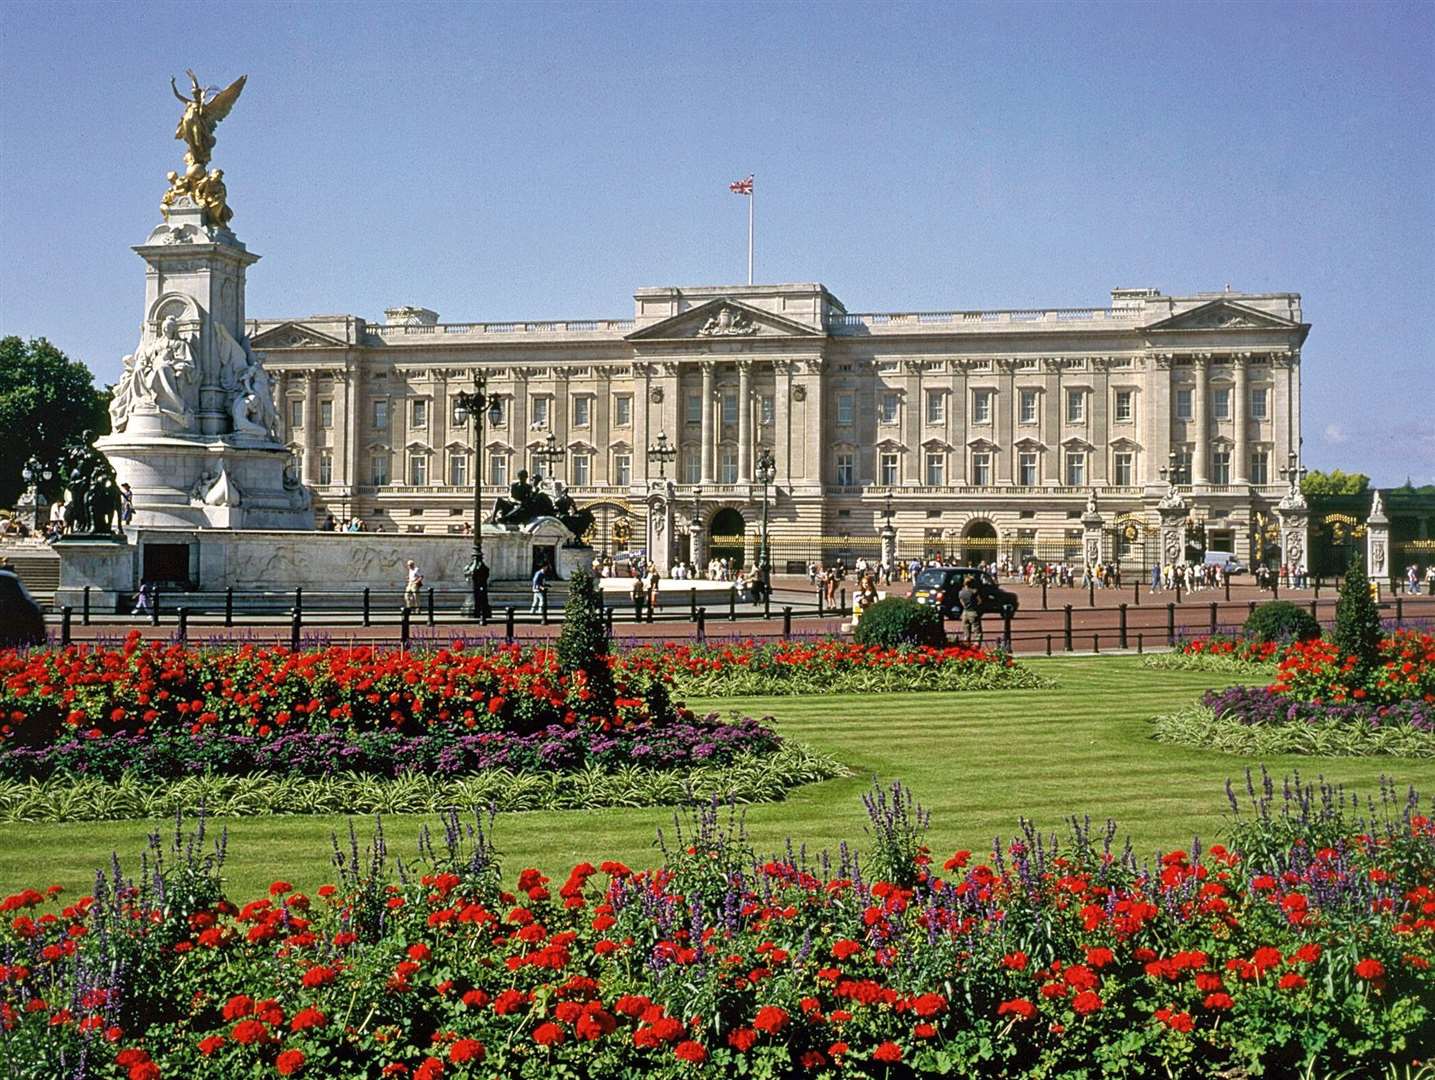 The Queen was making the journey from Buckingham Palace to Horse Guards Parade when the incident took place